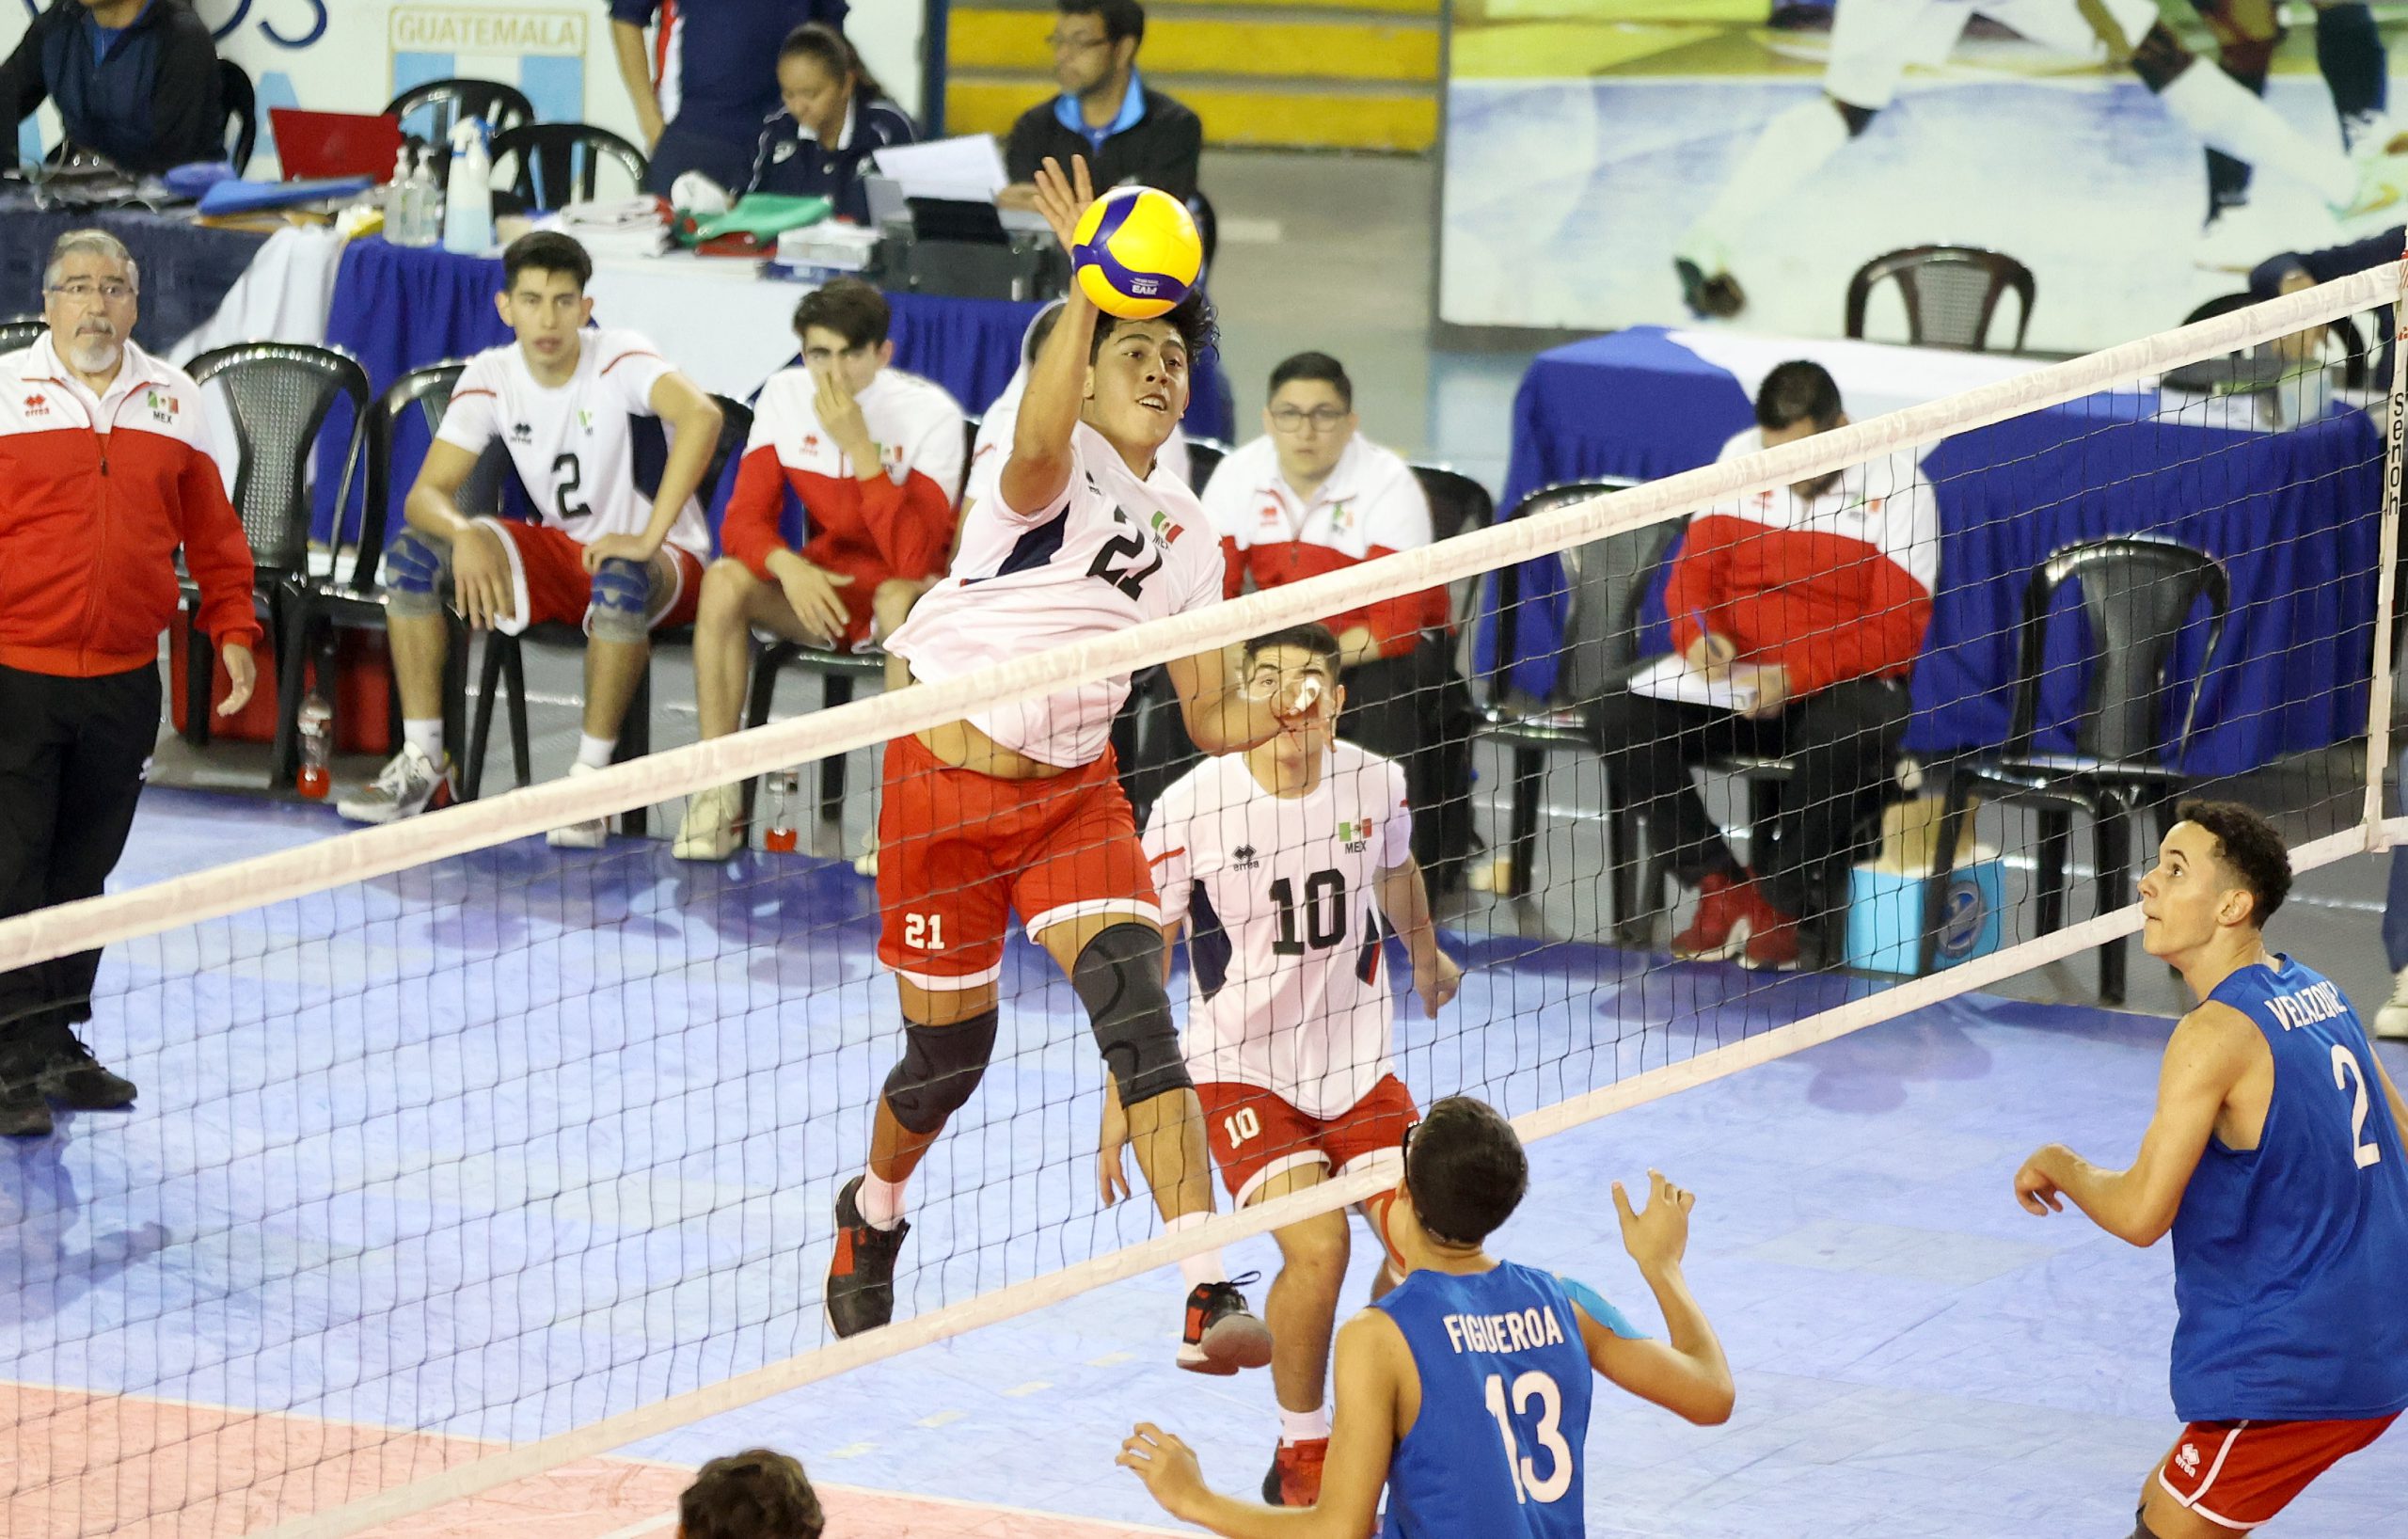 Mexico outclass Puerto Rico in semis to reach their second consecutive U19 Pan Am Cup finals